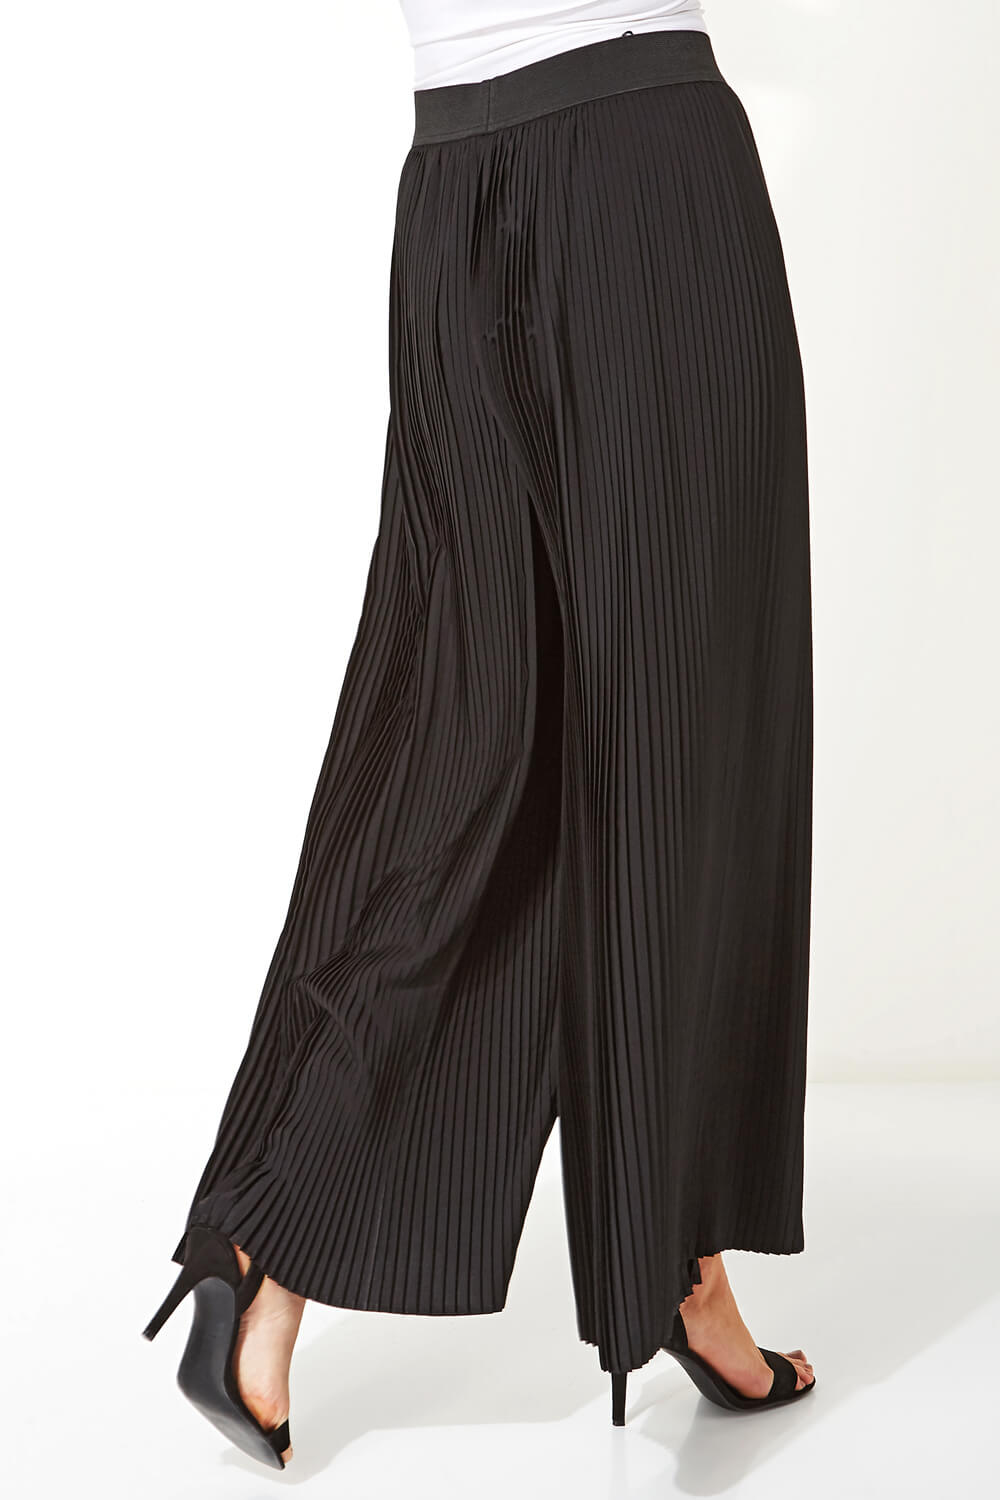 Black Pleated Wide Leg Trousers, Image 2 of 5